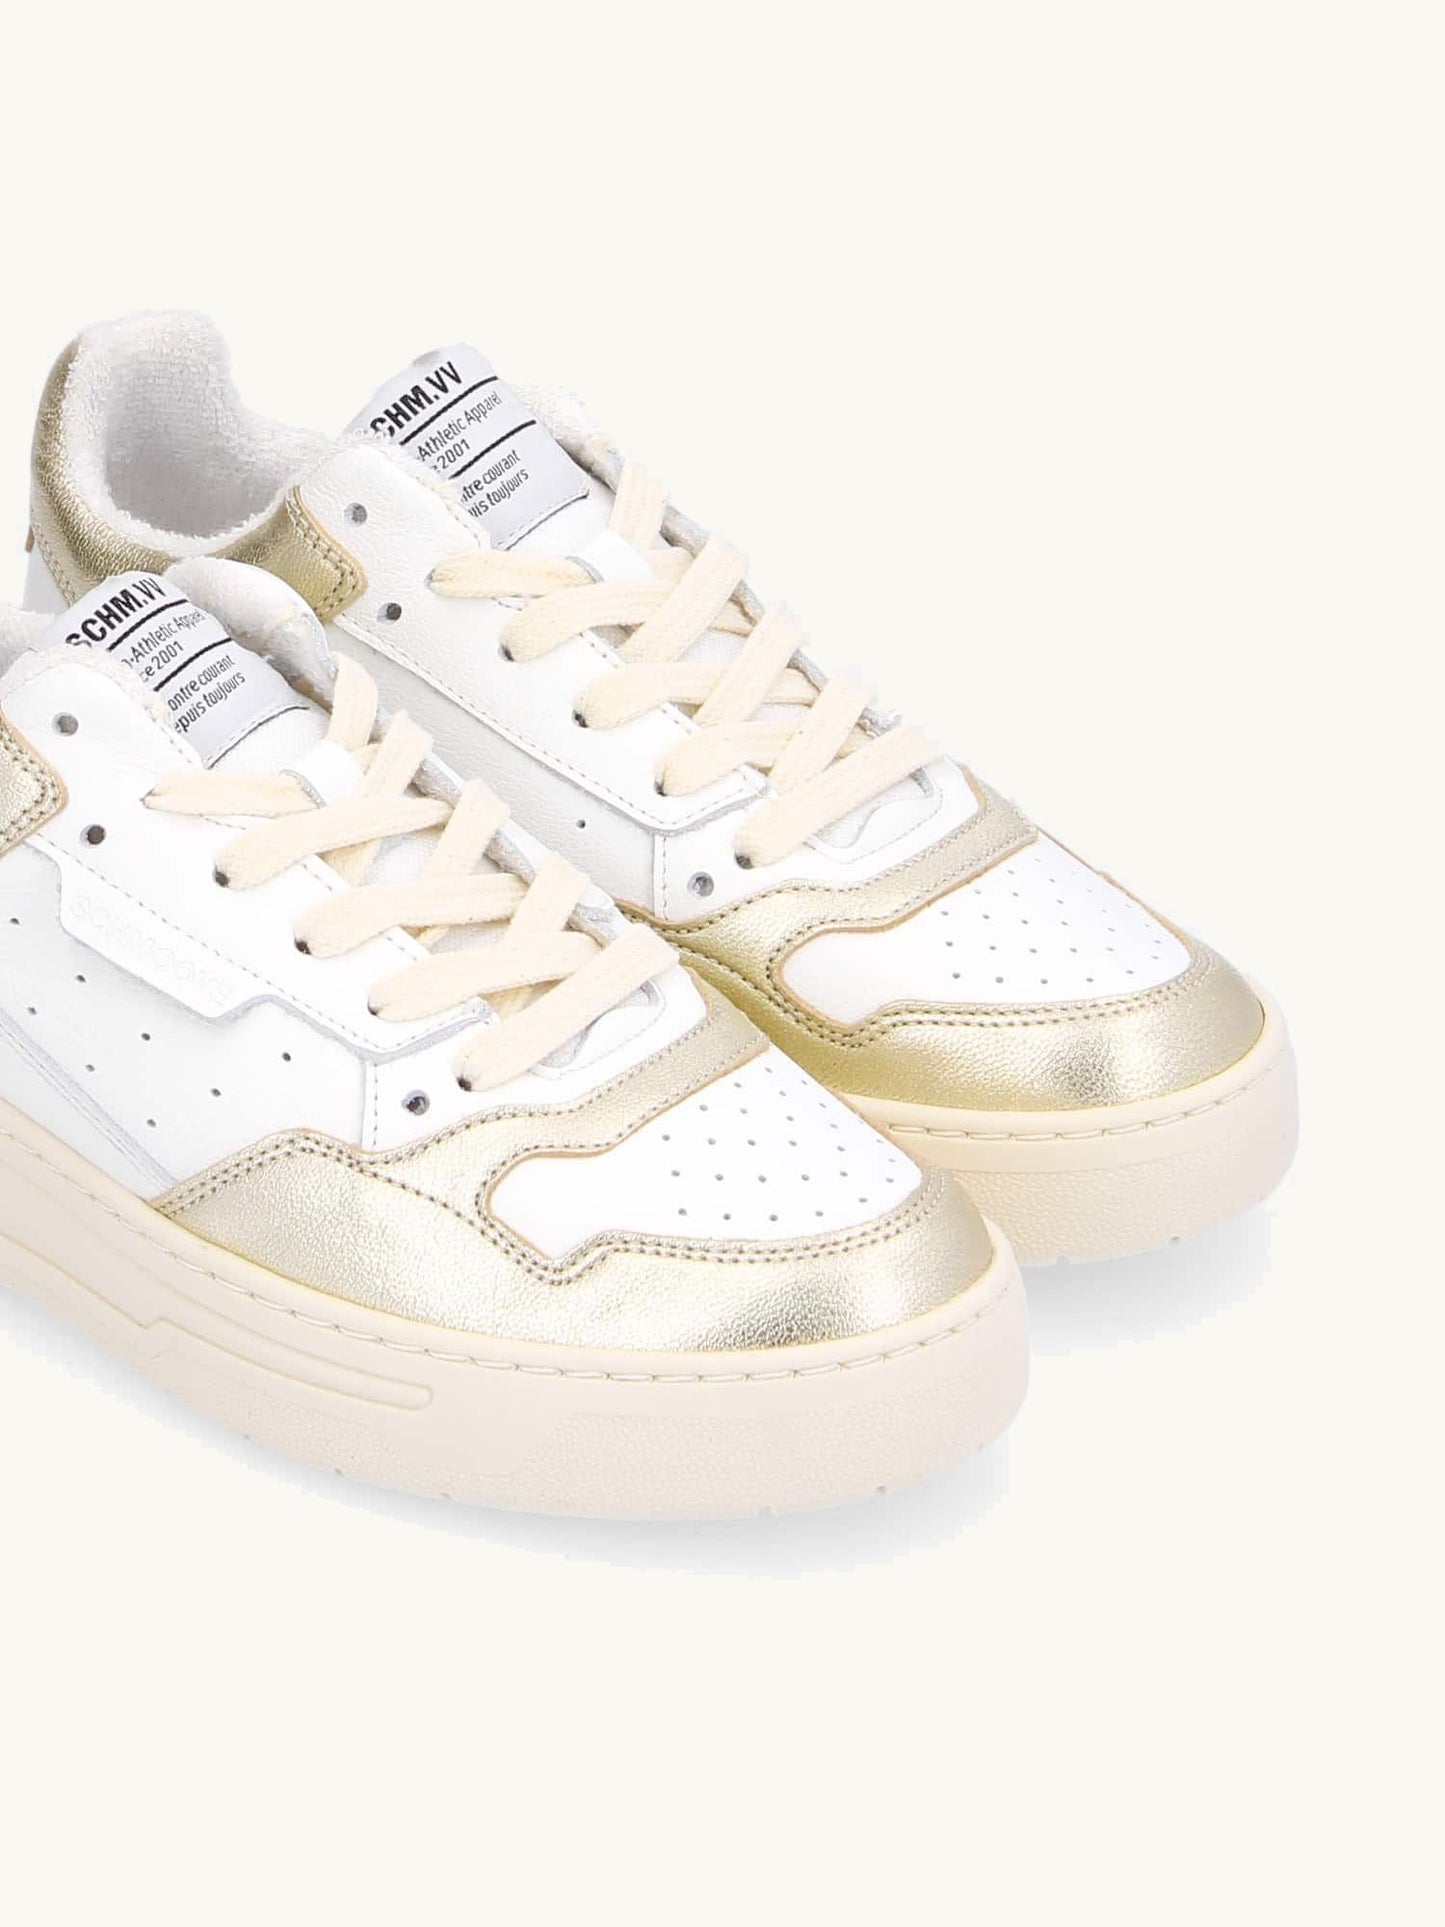 SMATCH NEW TRAINER WHITE/ CHAMPAGNE GOLD